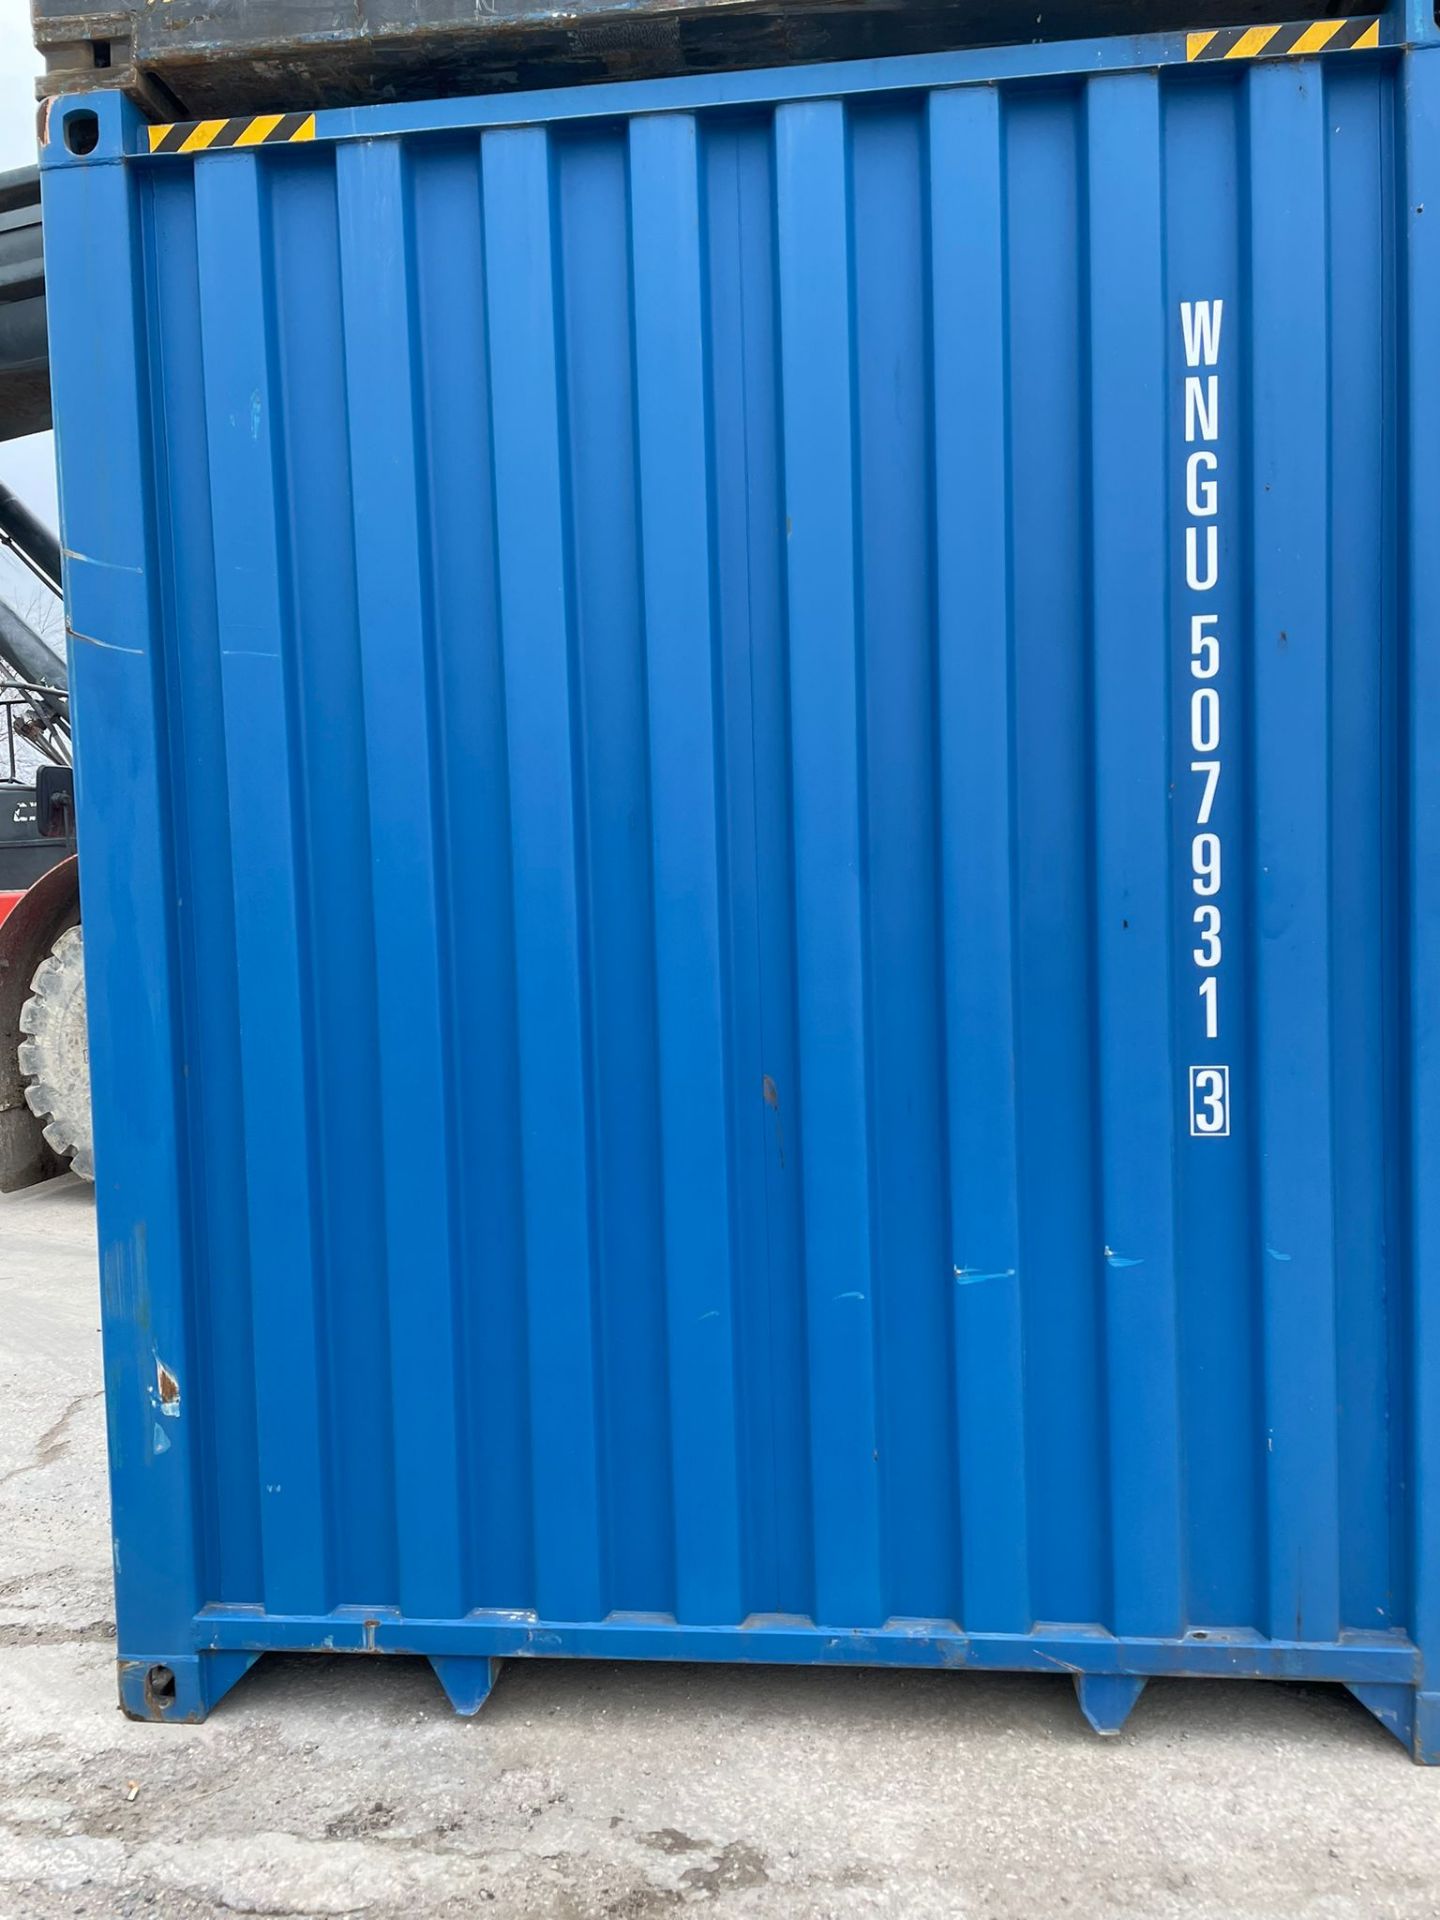 40ft HC Shipping Container - ref WNGU5079313 - NO RESERVE - Image 5 of 5